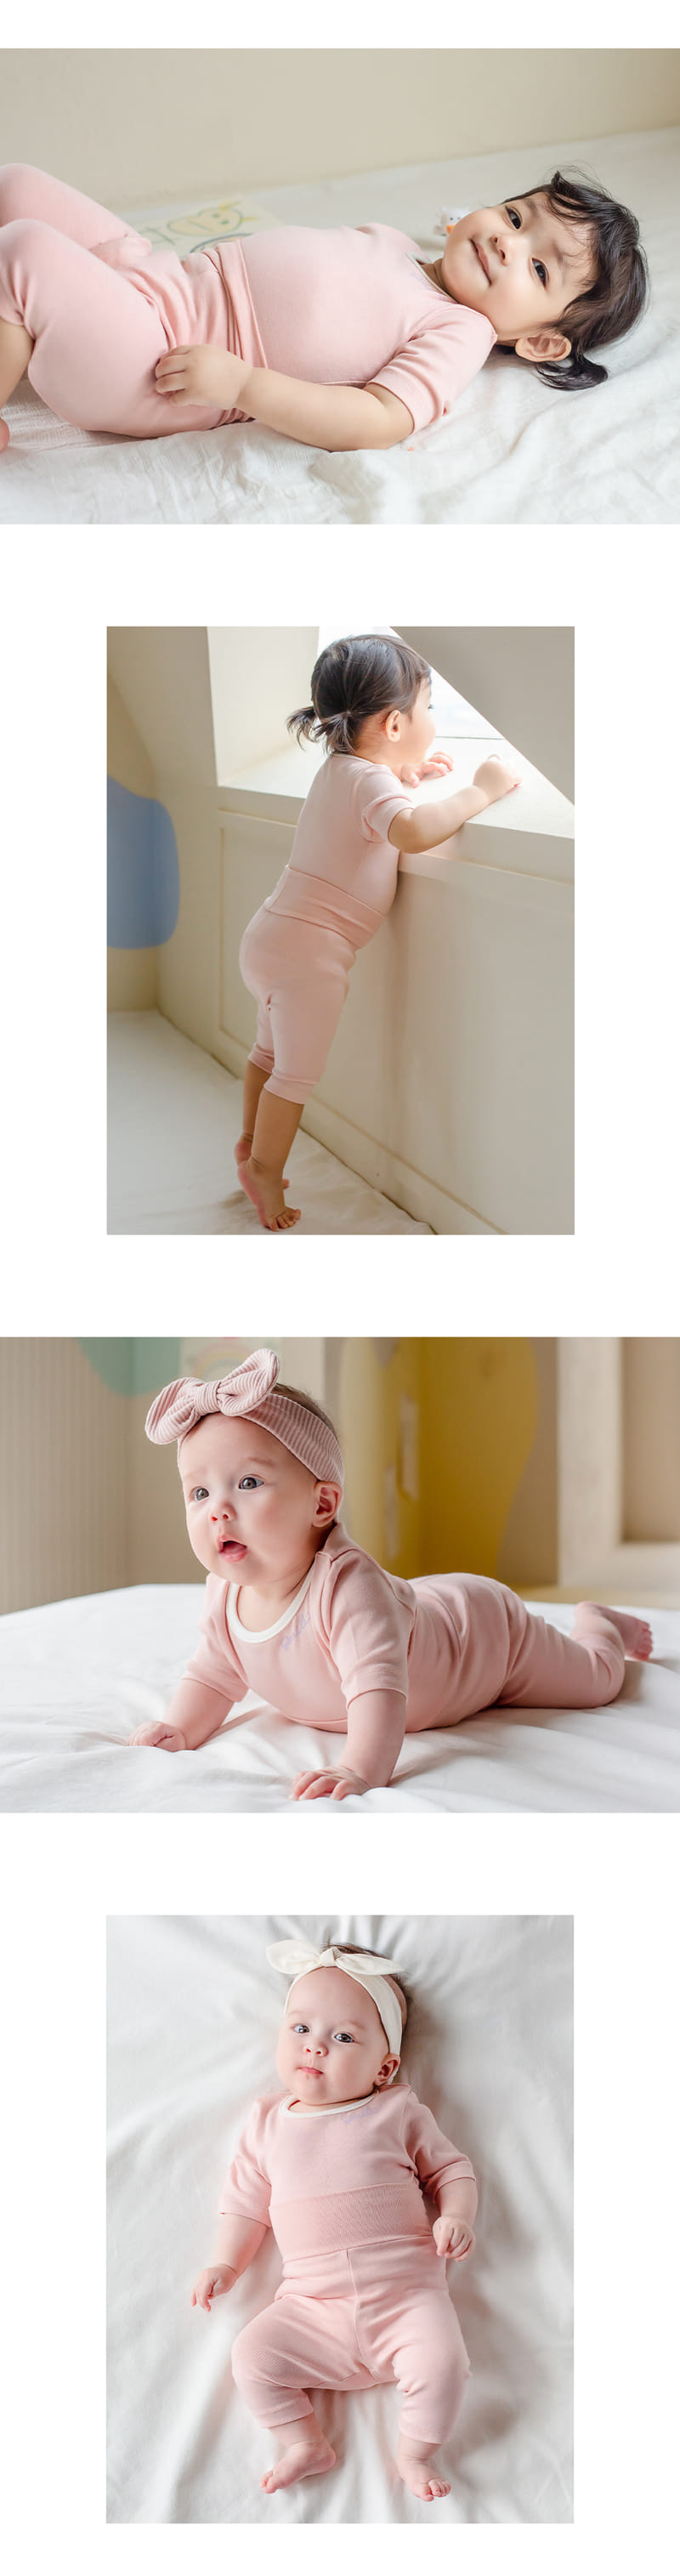 Kids Clara - Korean Baby Fashion - #onlinebabyboutique - Smile Compy Belly Baby Easy Wear - 3